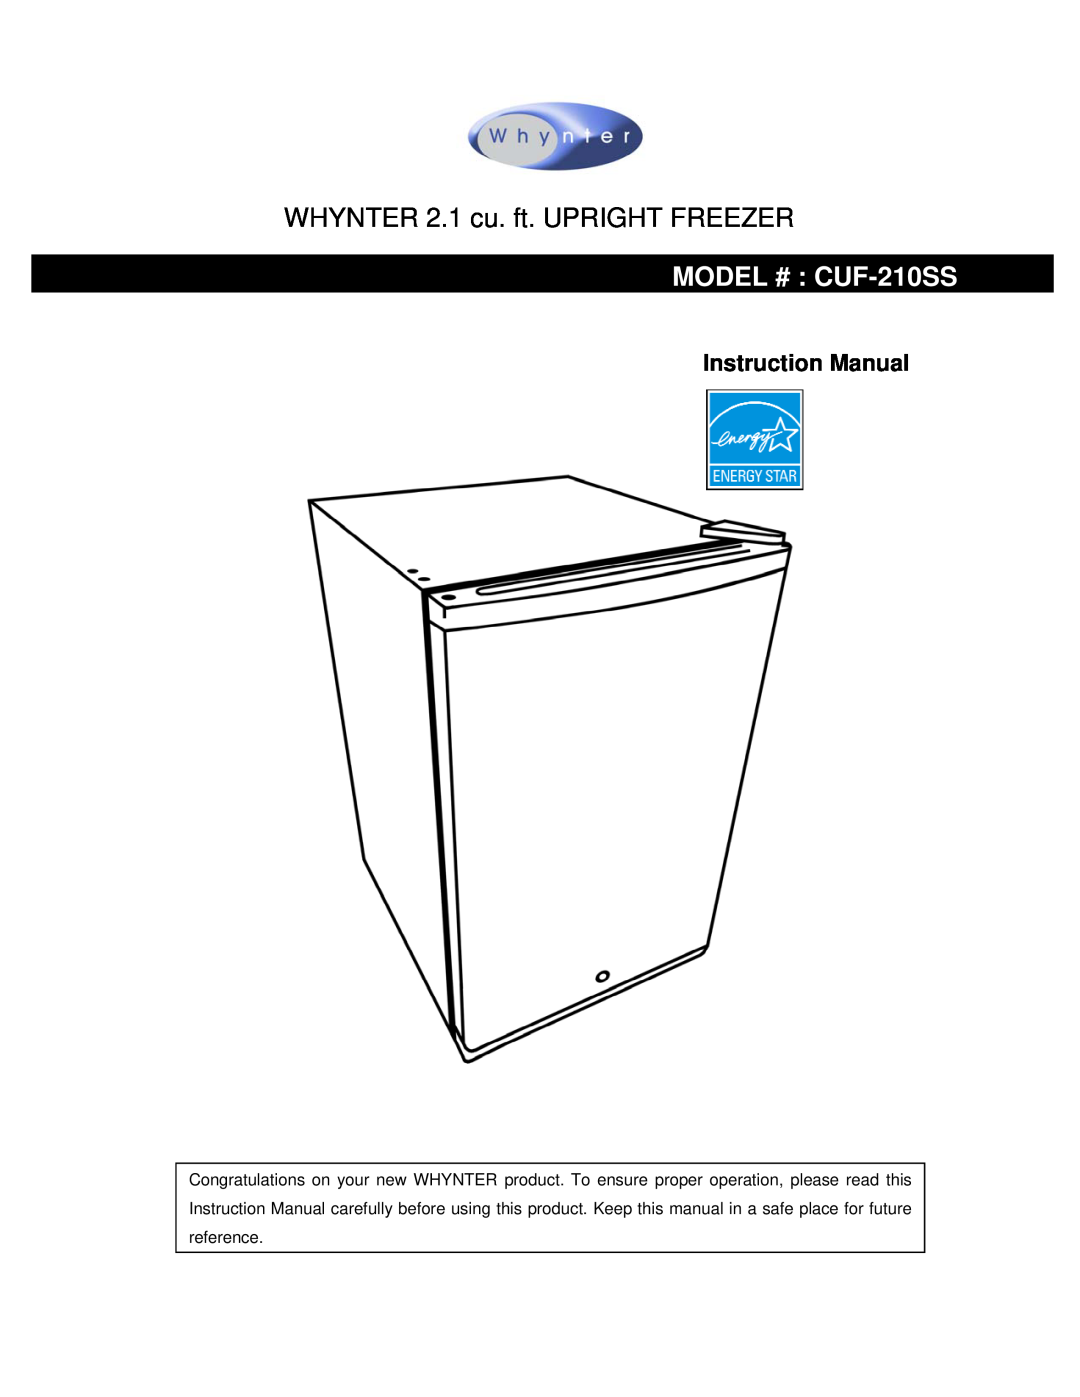 Whynter instruction manual WHYNTER 2.1 cu. ft. UPRIGHT FREEZER, MODEL # CUF-210SS 